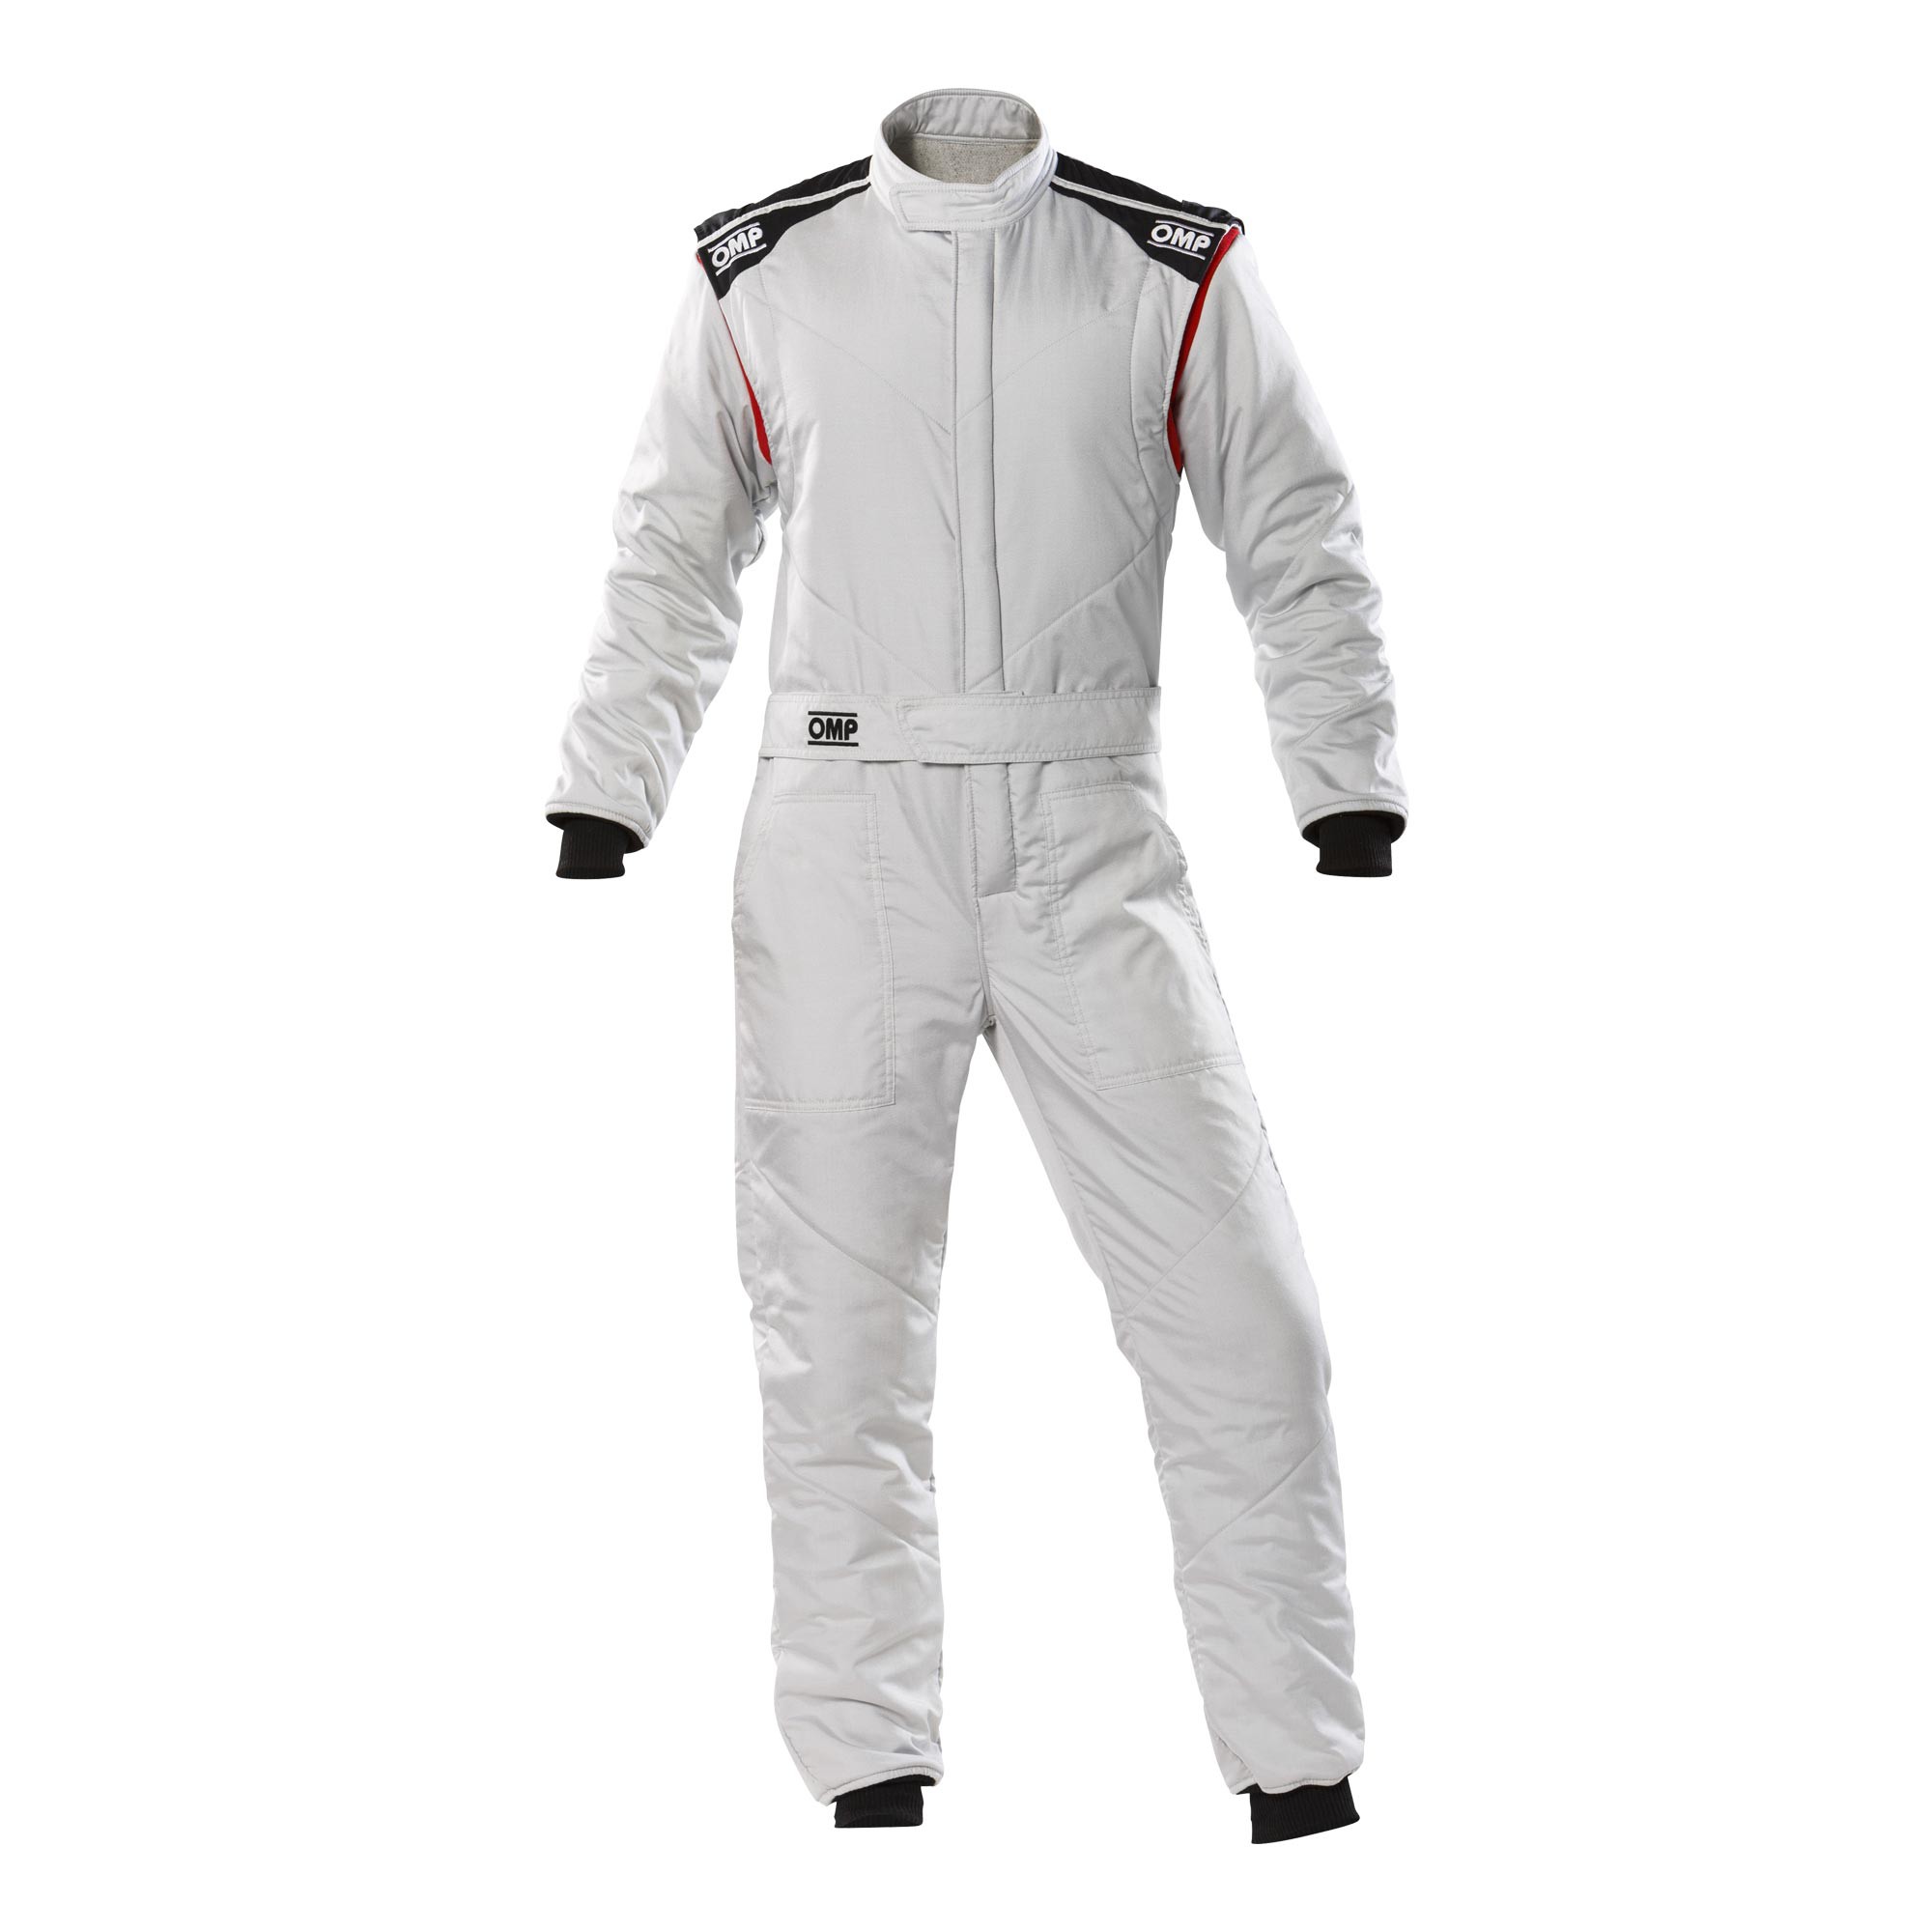 FIRST-S OVERALL SILVER SIZE 44 FIA 8856-2018